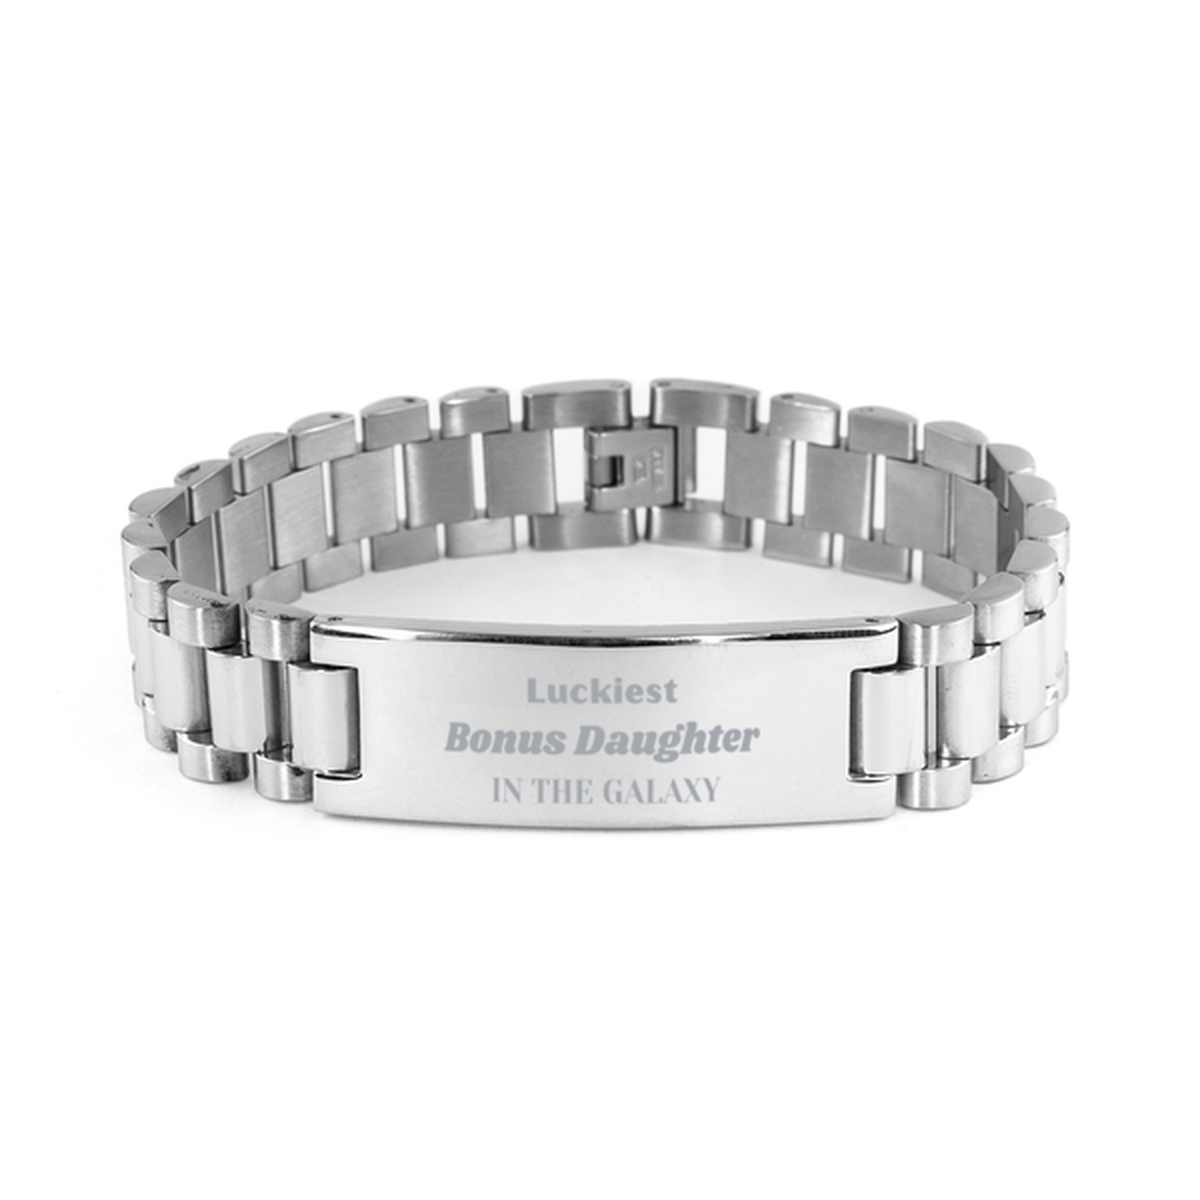 Luckiest Bonus Daughter in the Galaxy, To My Bonus Daughter Engraved Gifts, Christmas Bonus Daughter Ladder Stainless Steel Bracelet Gifts, X-mas Birthday Unique Gifts For Bonus Daughter Men Women